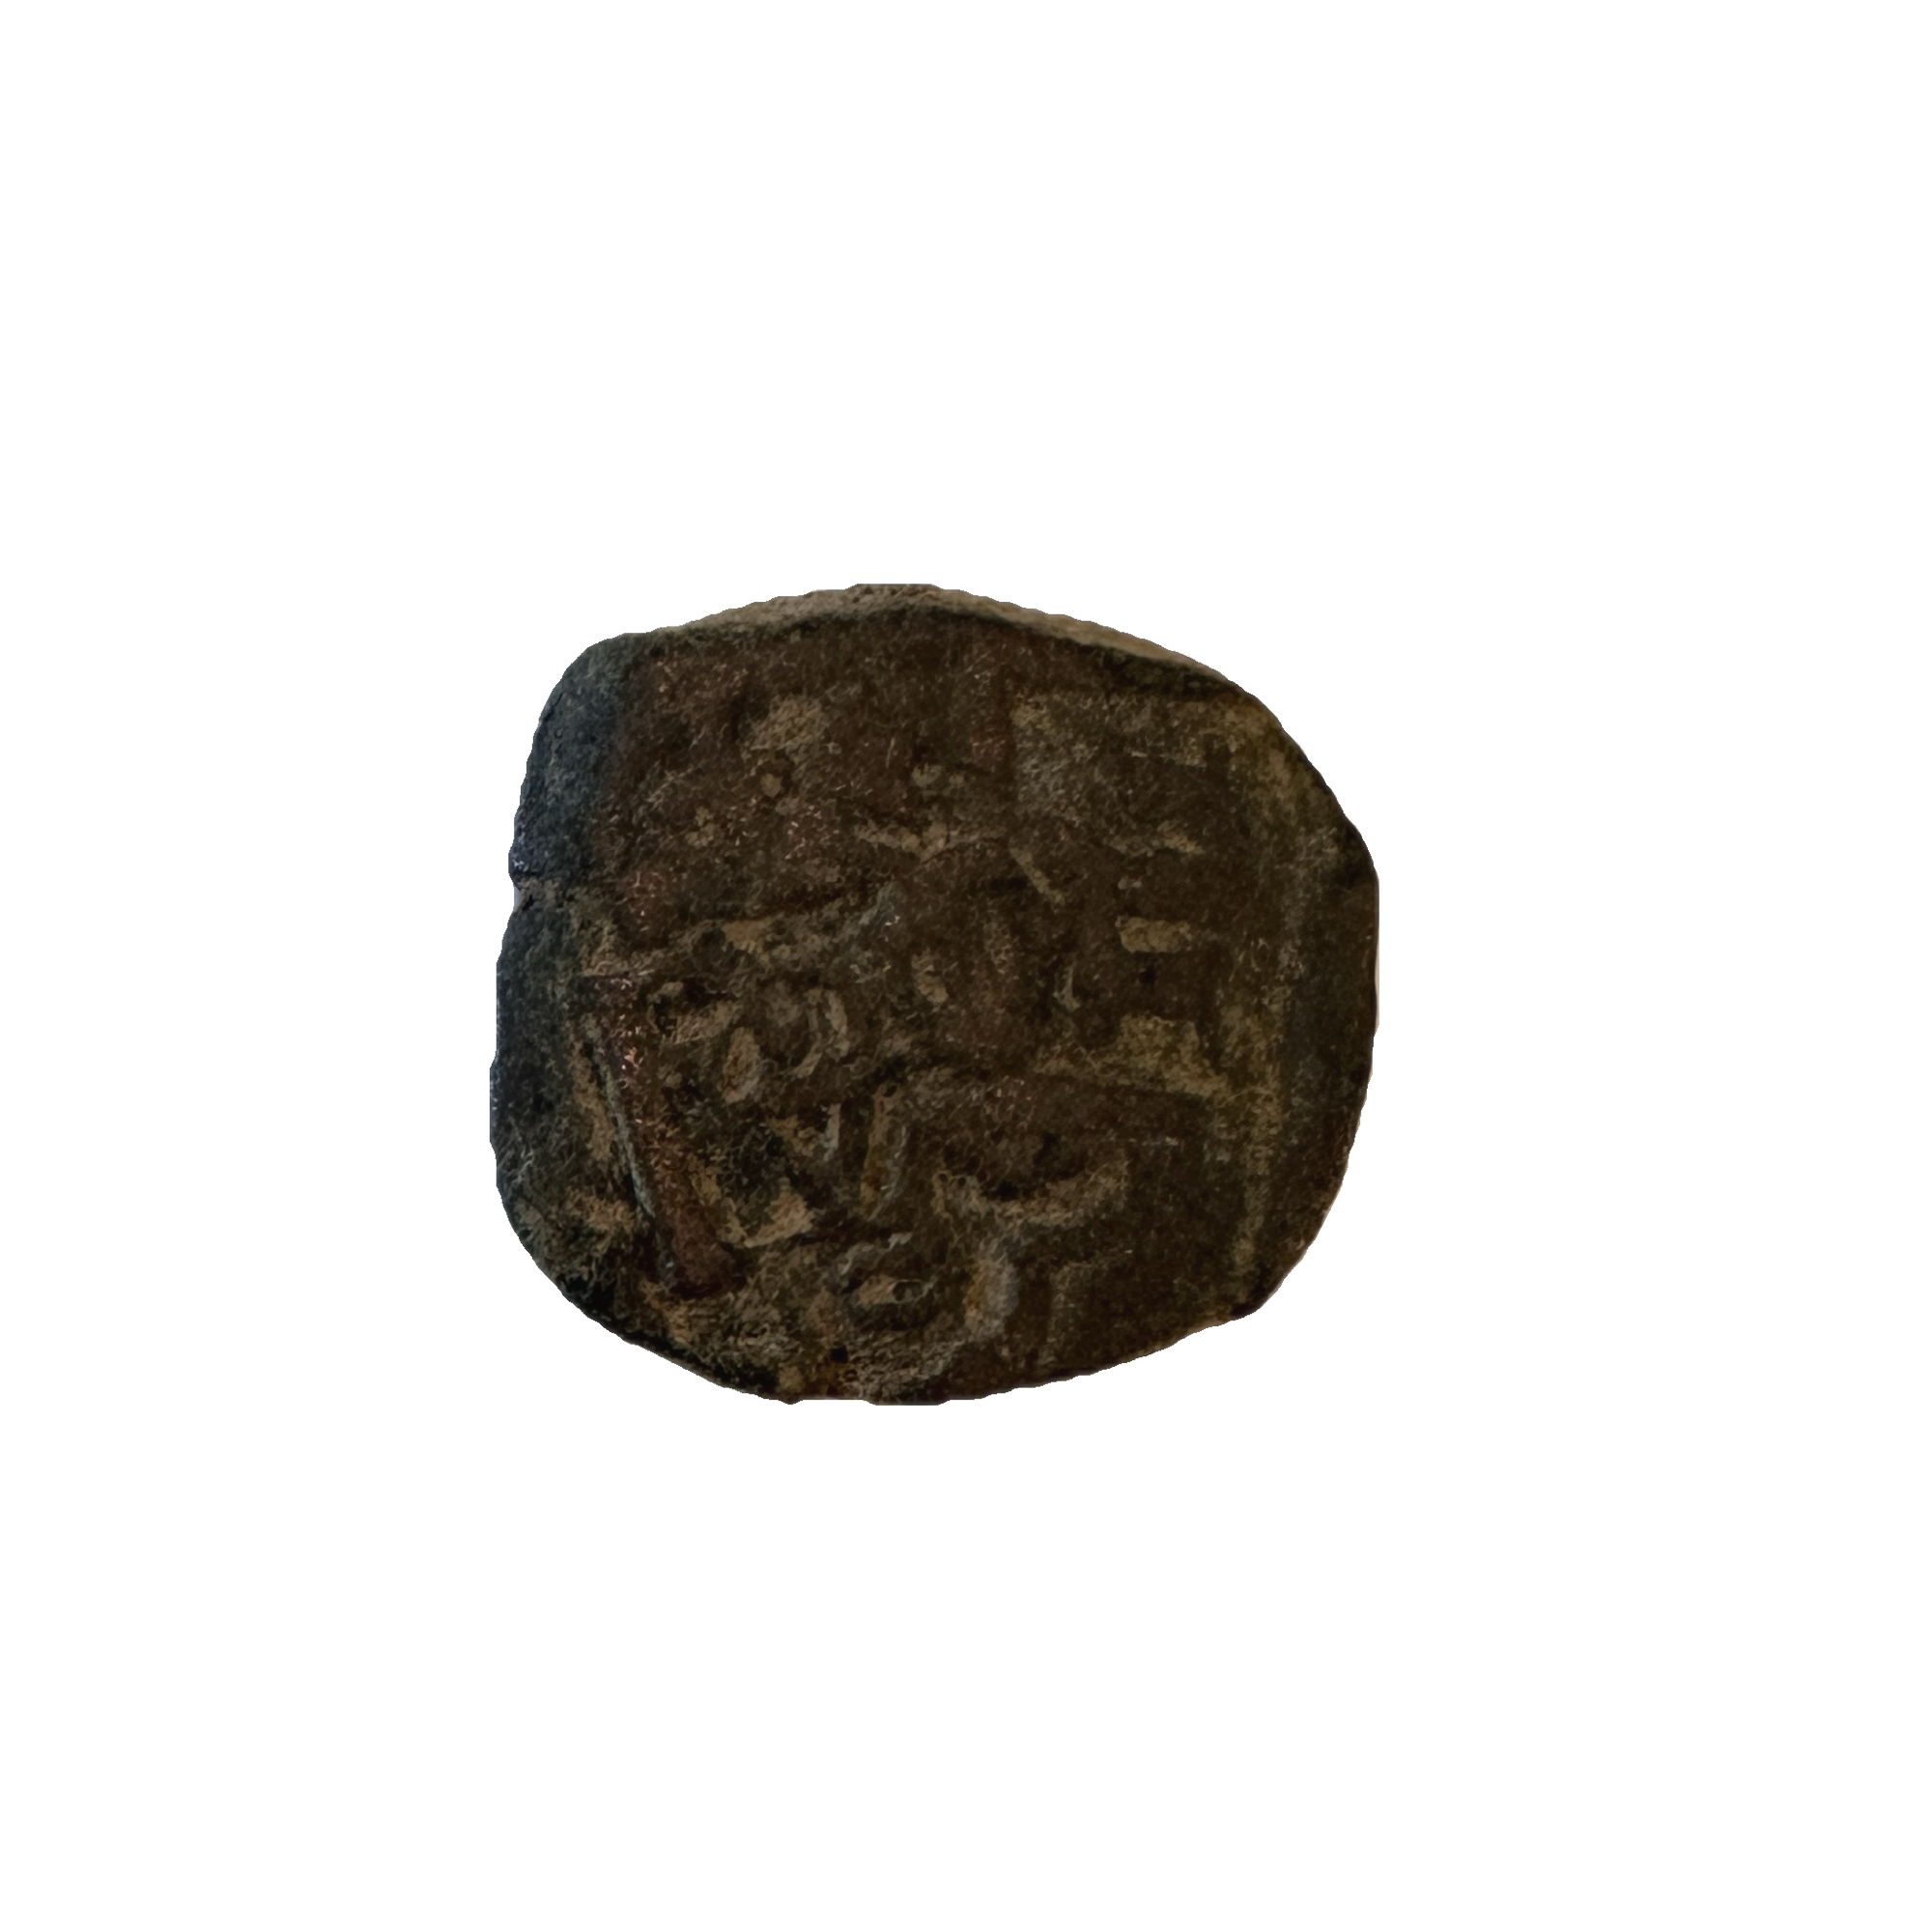 A heavily detailed bronze pirate coin. This 17th century spanish cob has amazing detail front and back